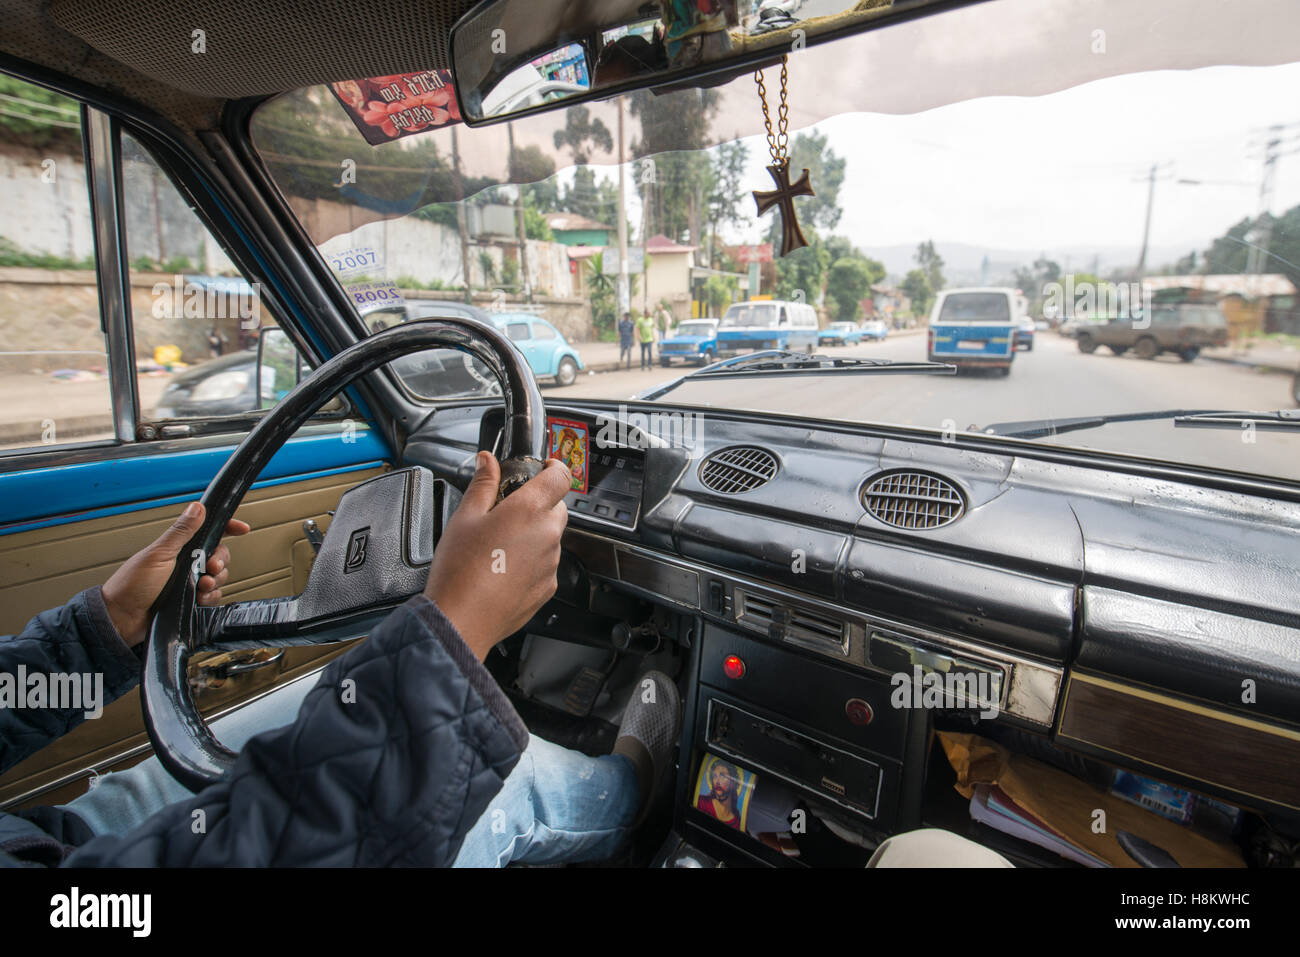 Addis Ababa, Ethiopia- Mn driving a Land rover Series 3 pick up truck through the streets of Addis Ababa. Stock Photo